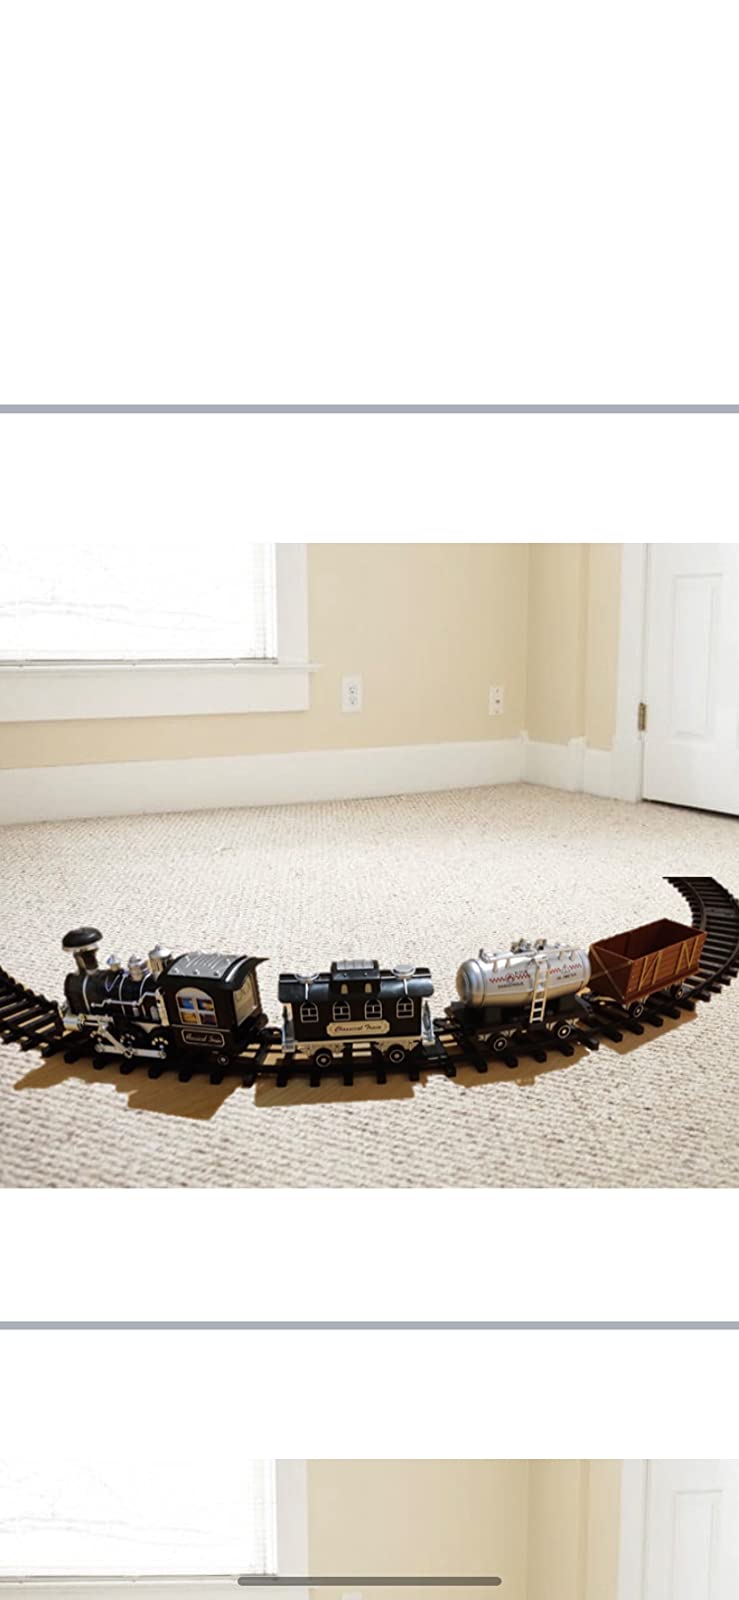 3 Speed Remote Control Rc Train Set With Smoke, Sound And Light photo review